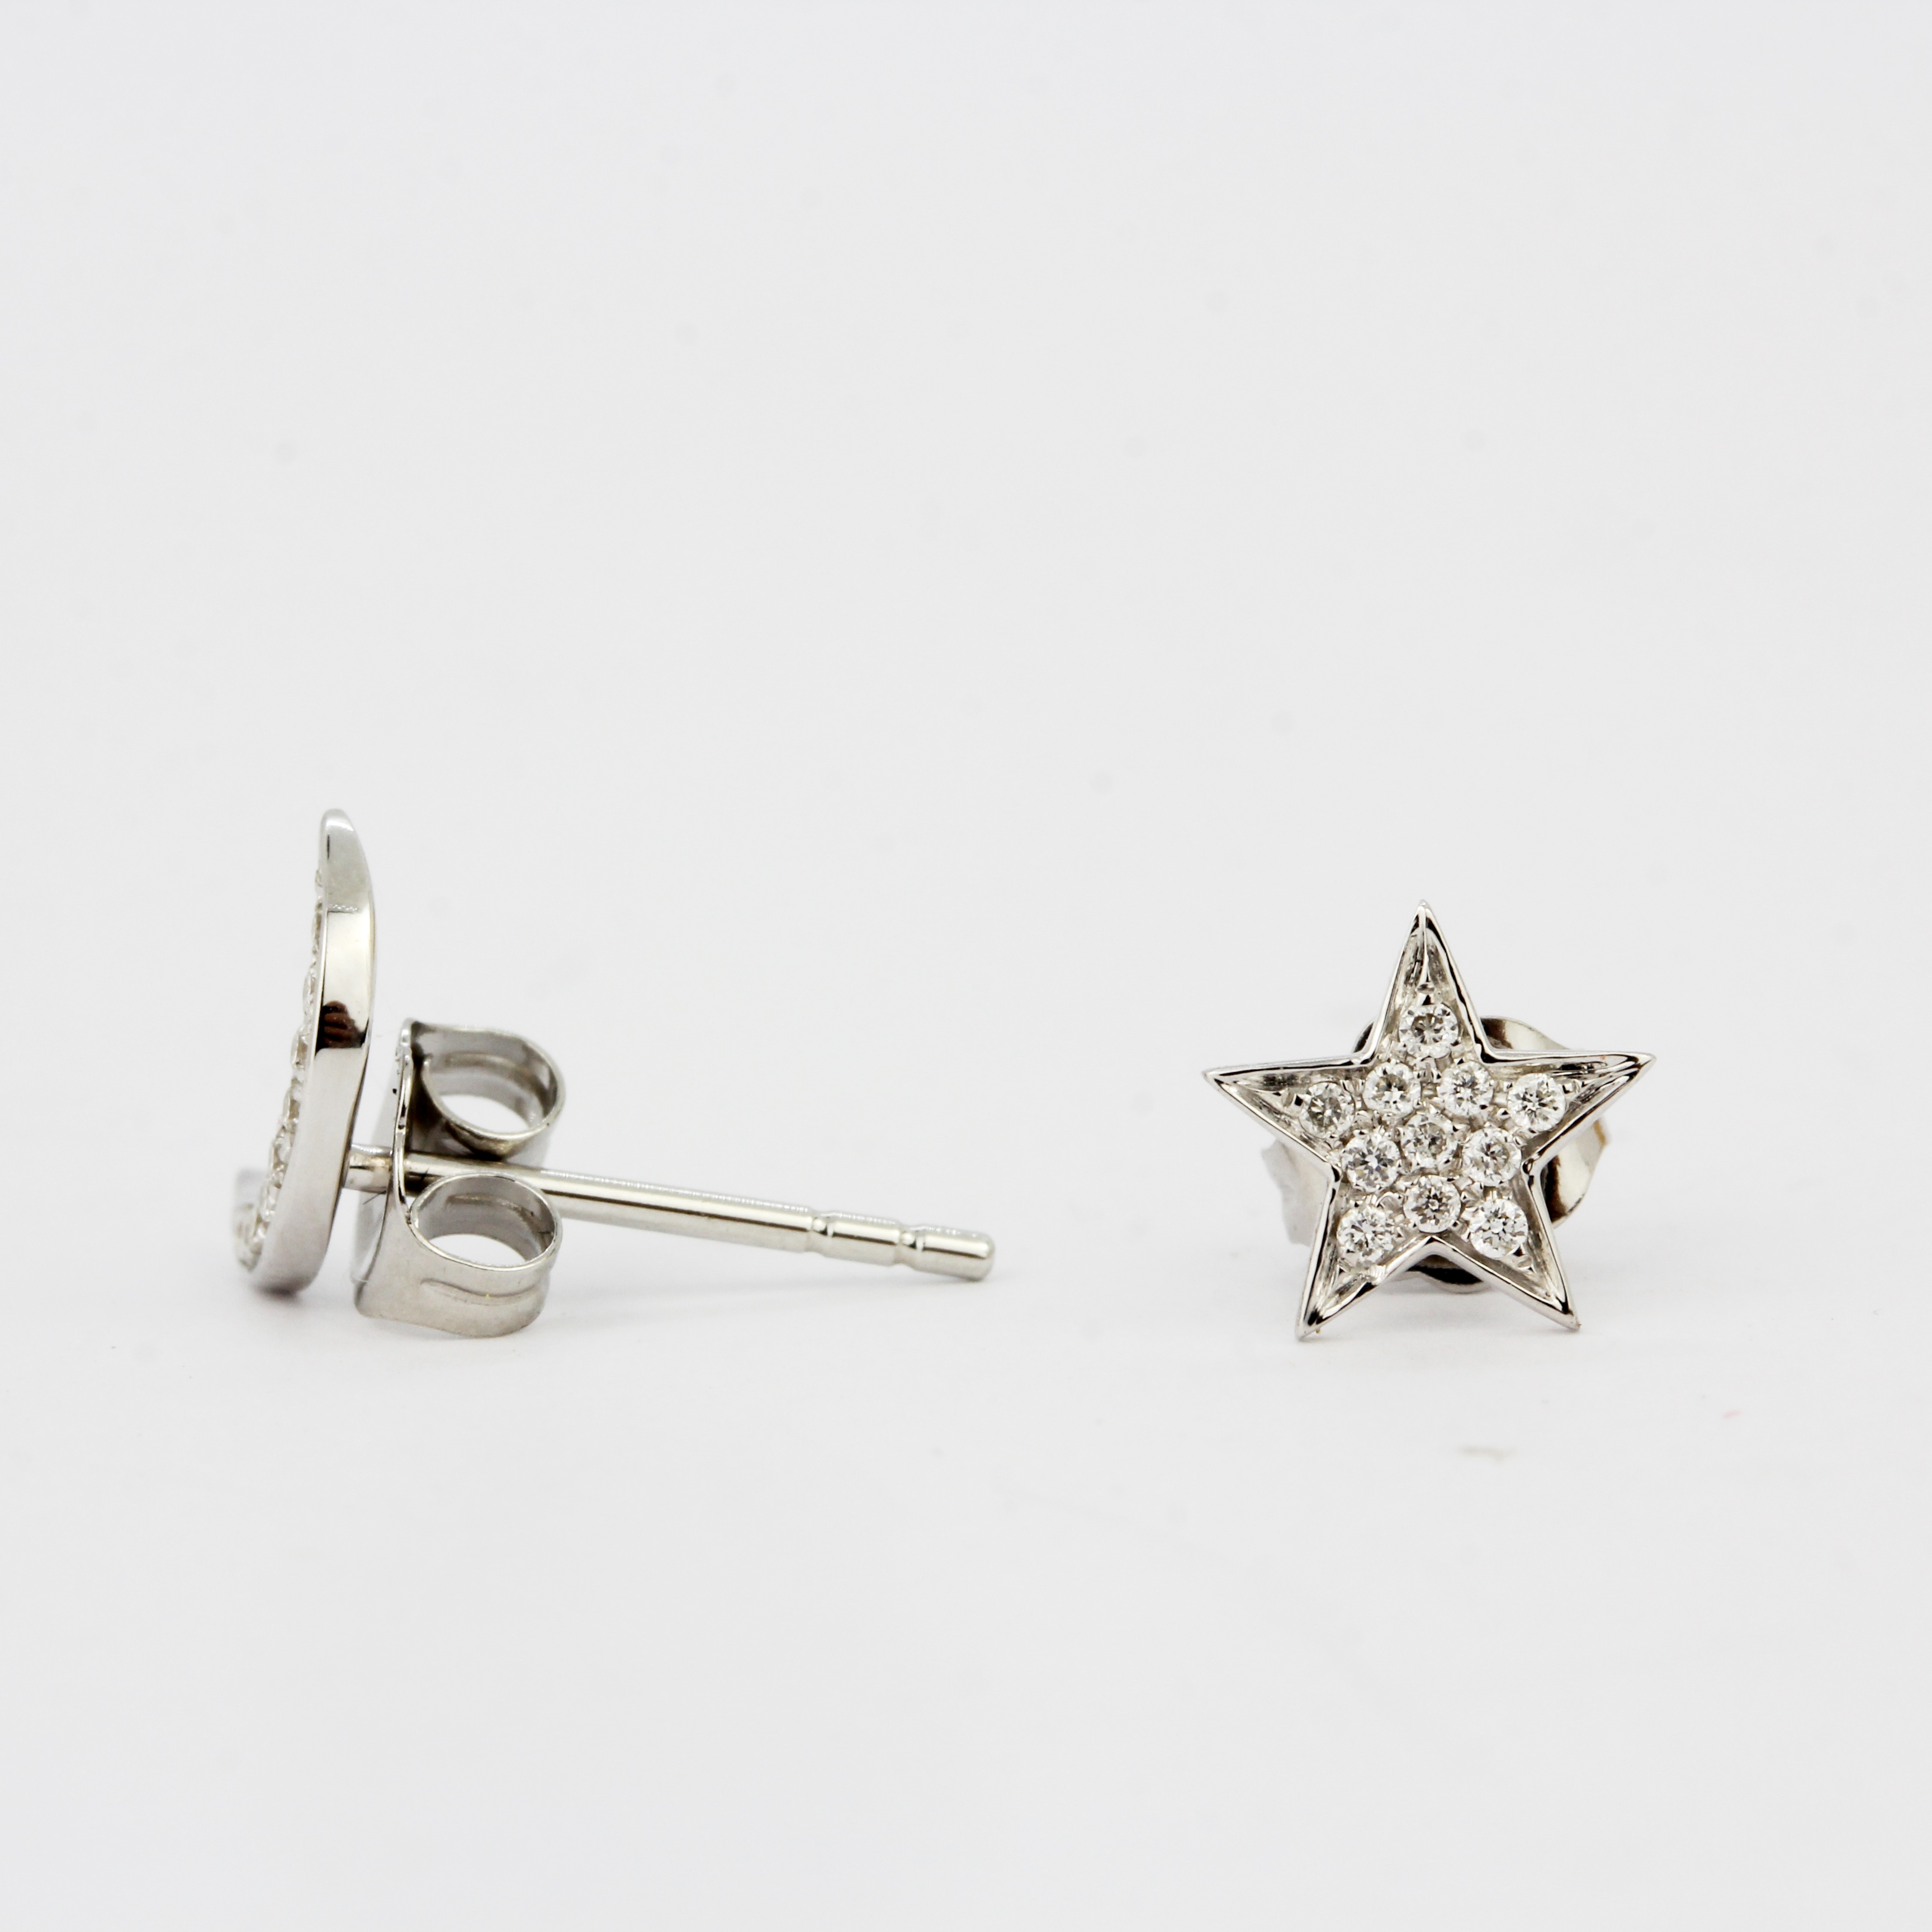 A pair of 18ct white gold diamond set star and moon shaped stud earrings, L. 0.9cm. - Image 3 of 3